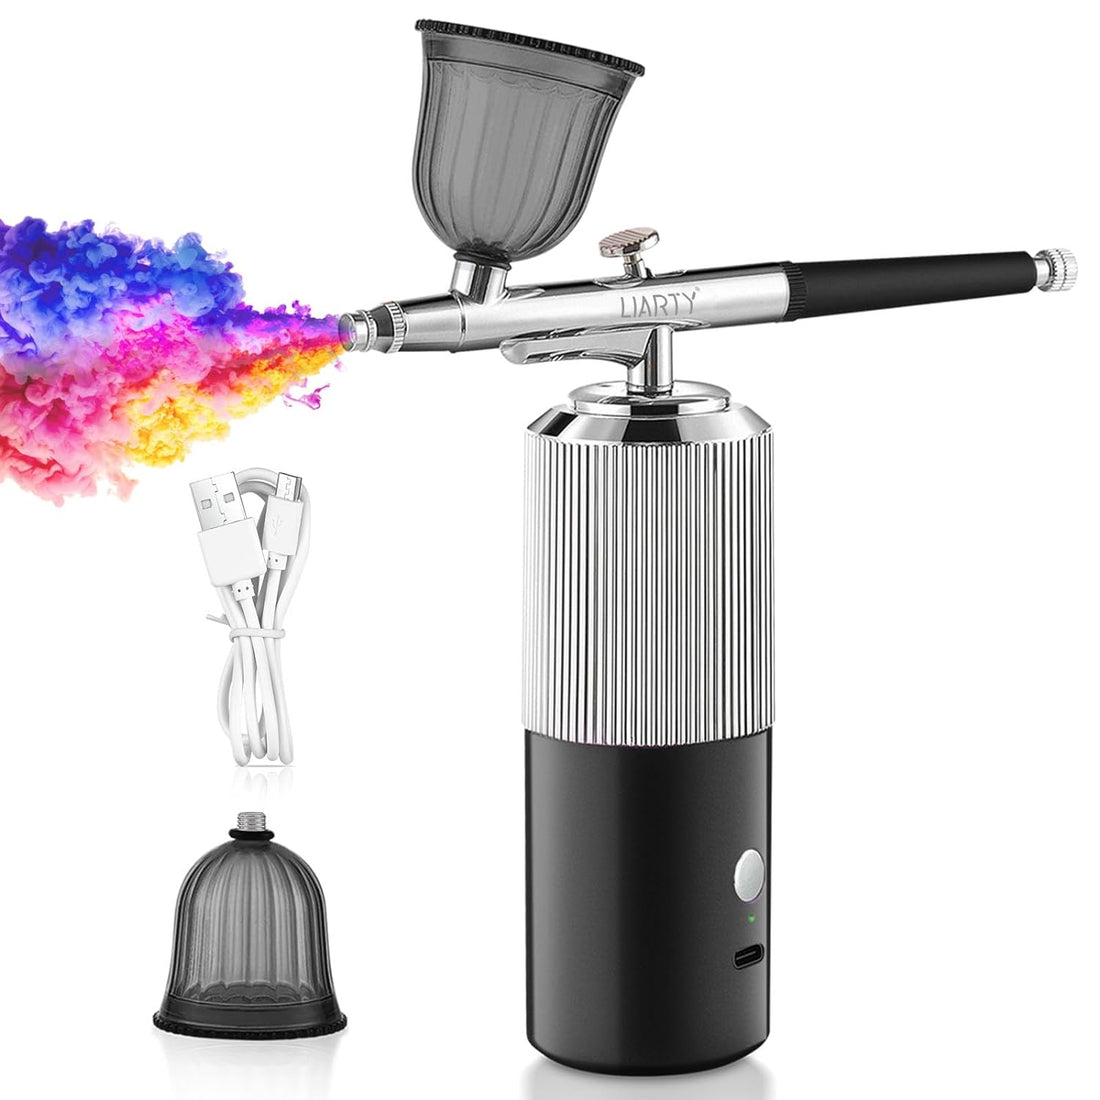 Portable Airbrush Kit Machine with Compressor, 32PSI High Pressure Rechargeable Handheld Airbrush, Professional Cordless Airbrush for Nail Art, Makeup, Barber, Cake Decor, Painting (Silver & Black)